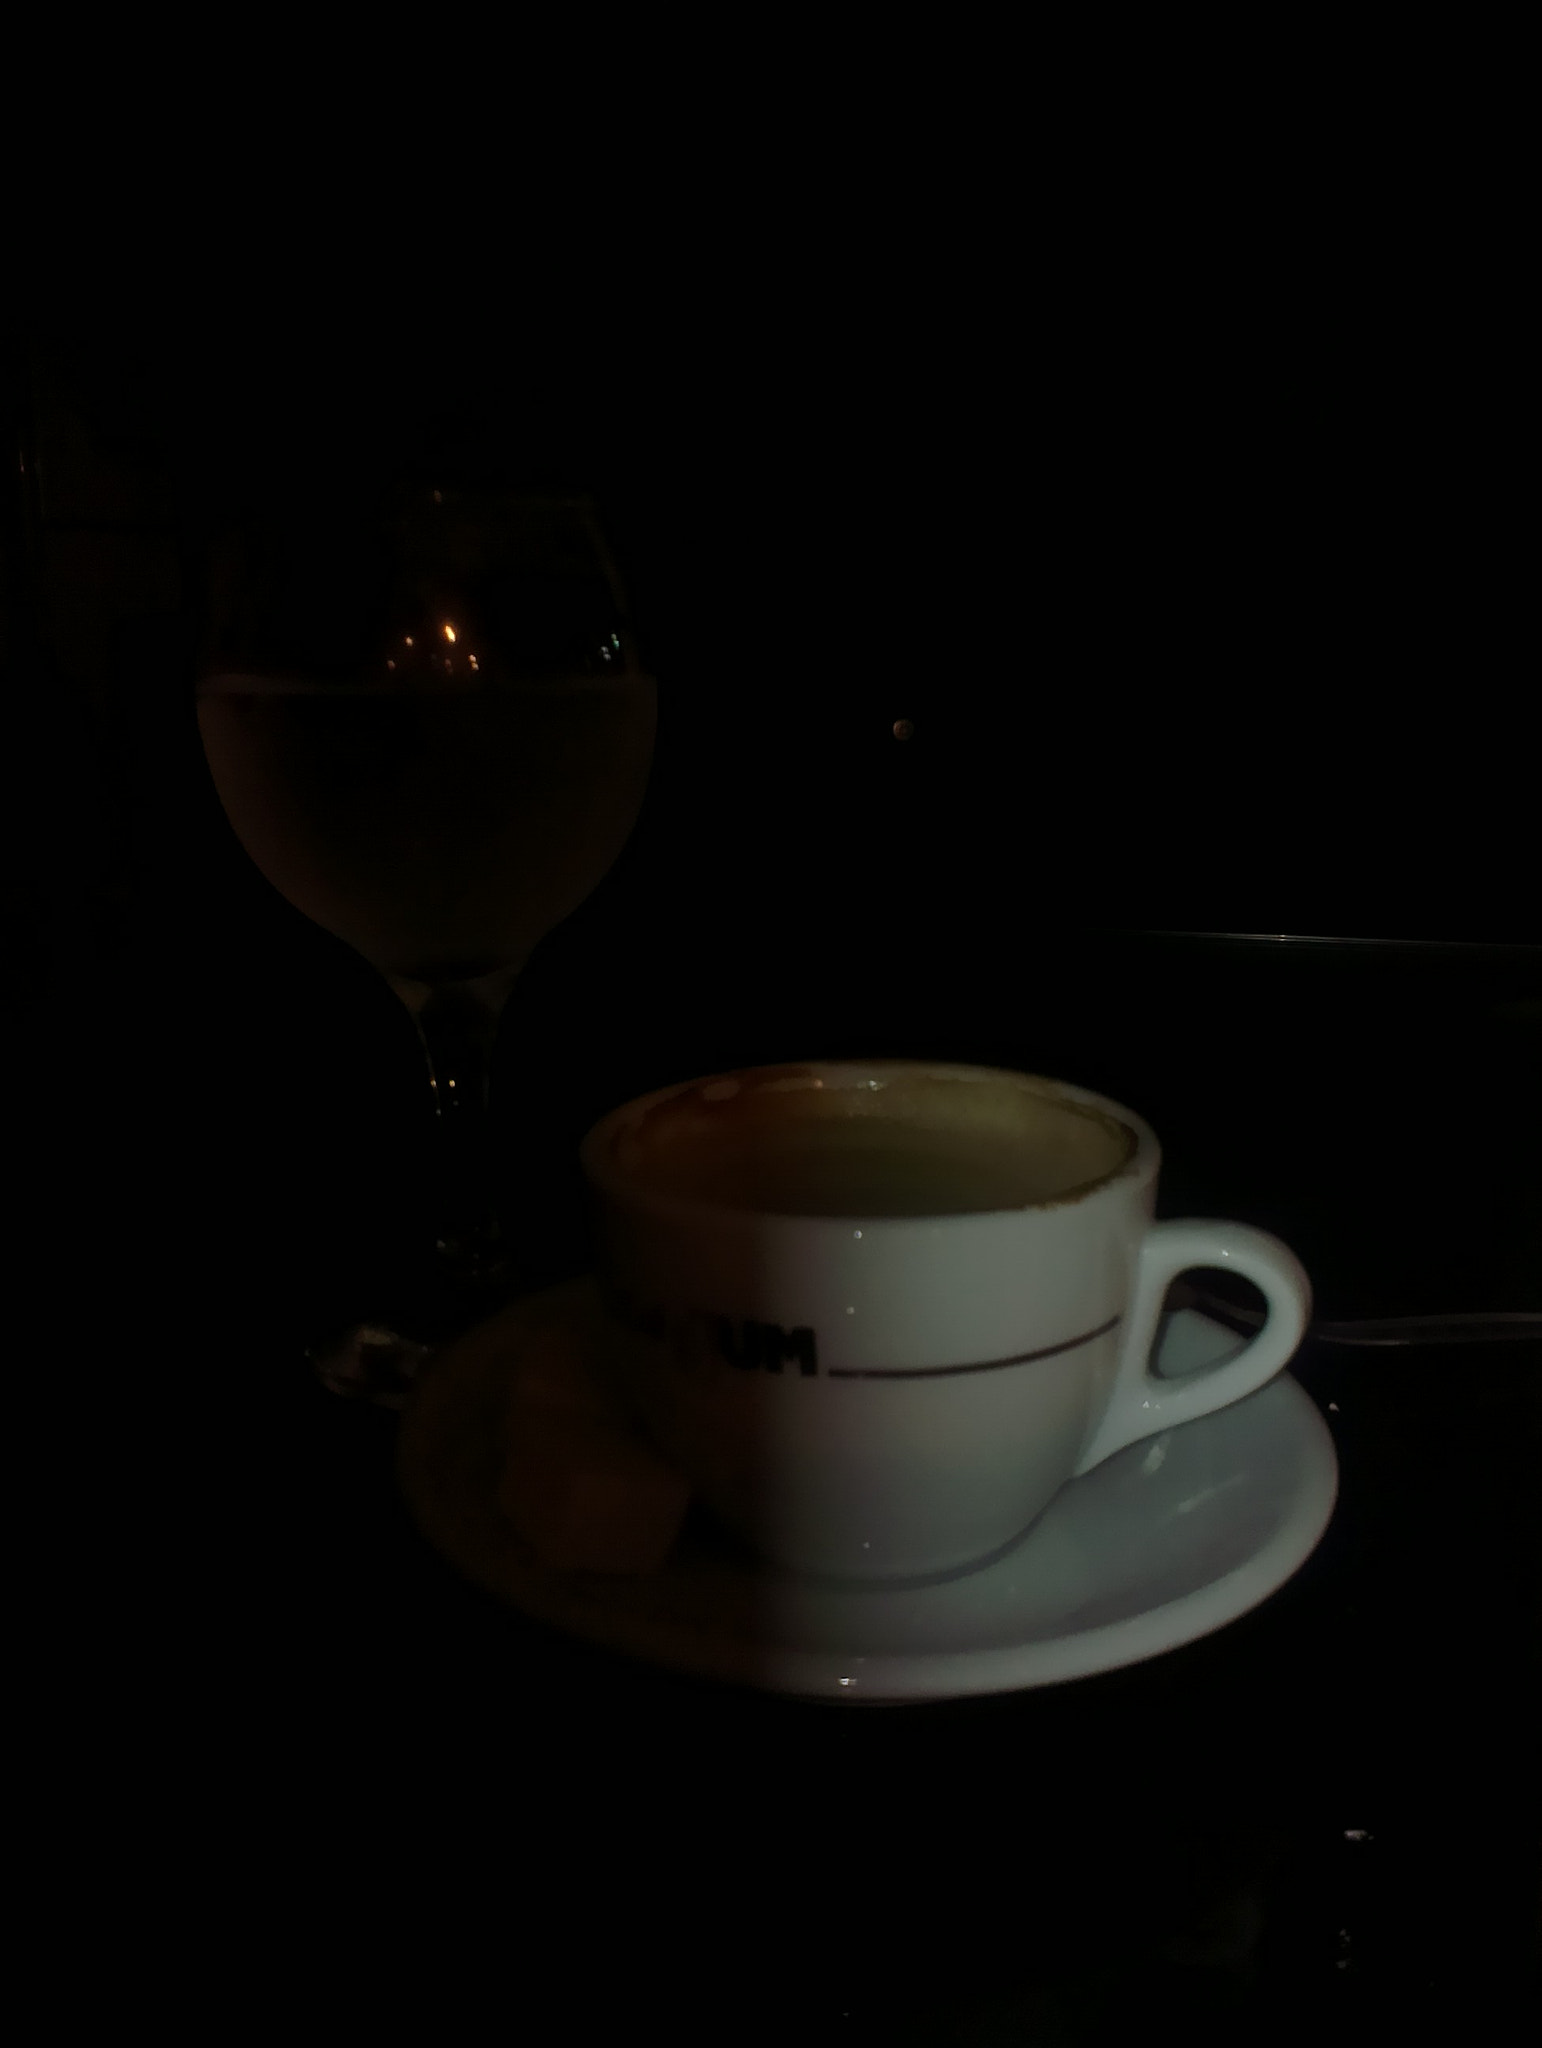 HTC DESIRE 601 DUAL SIM sample photo. Cup in the dark photography